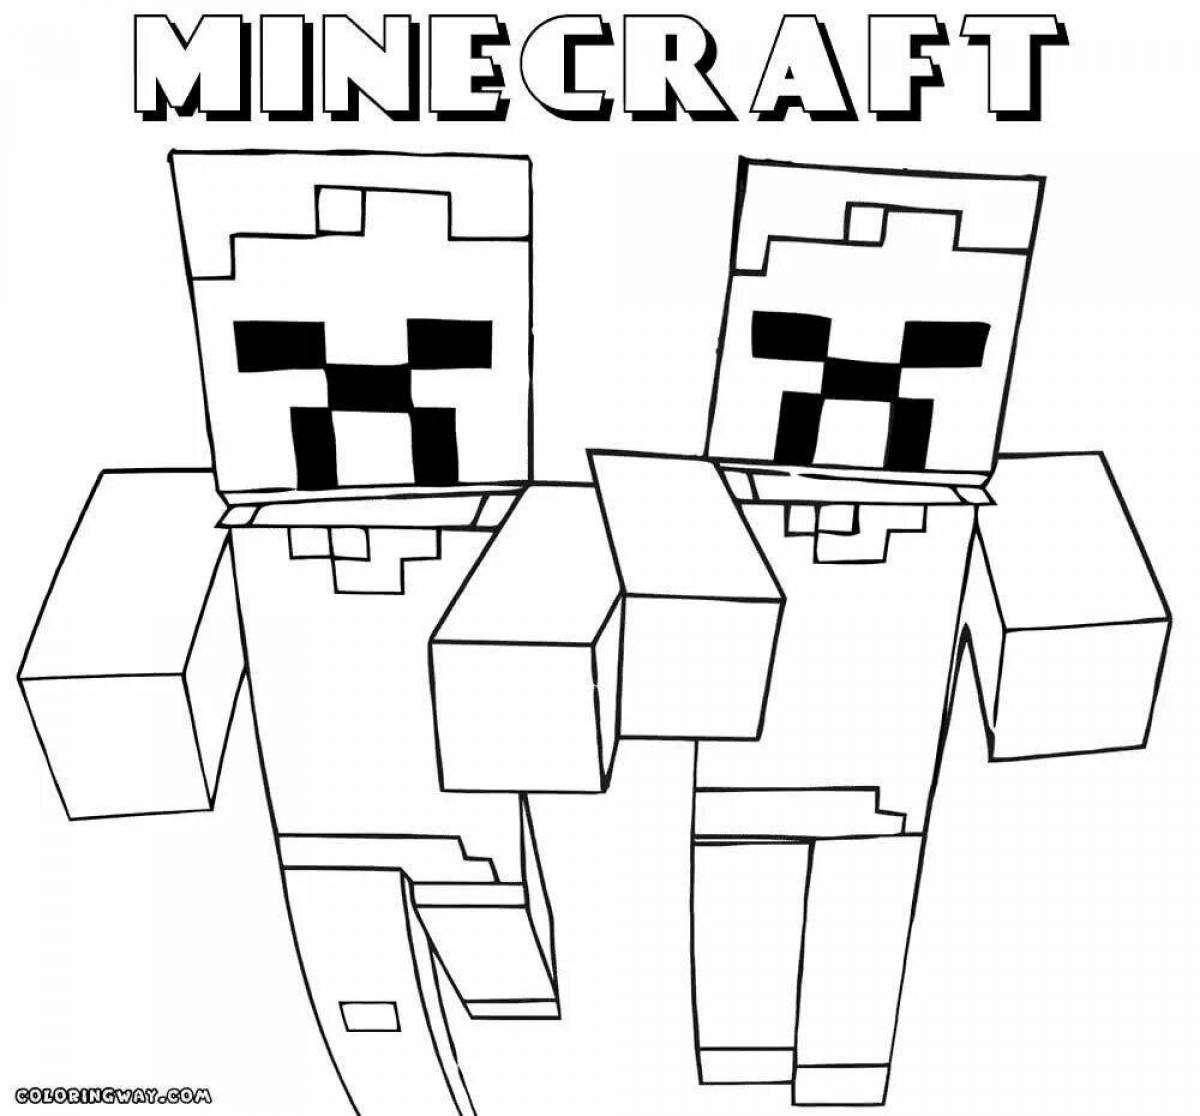 Shining minecraft ifrit coloring page